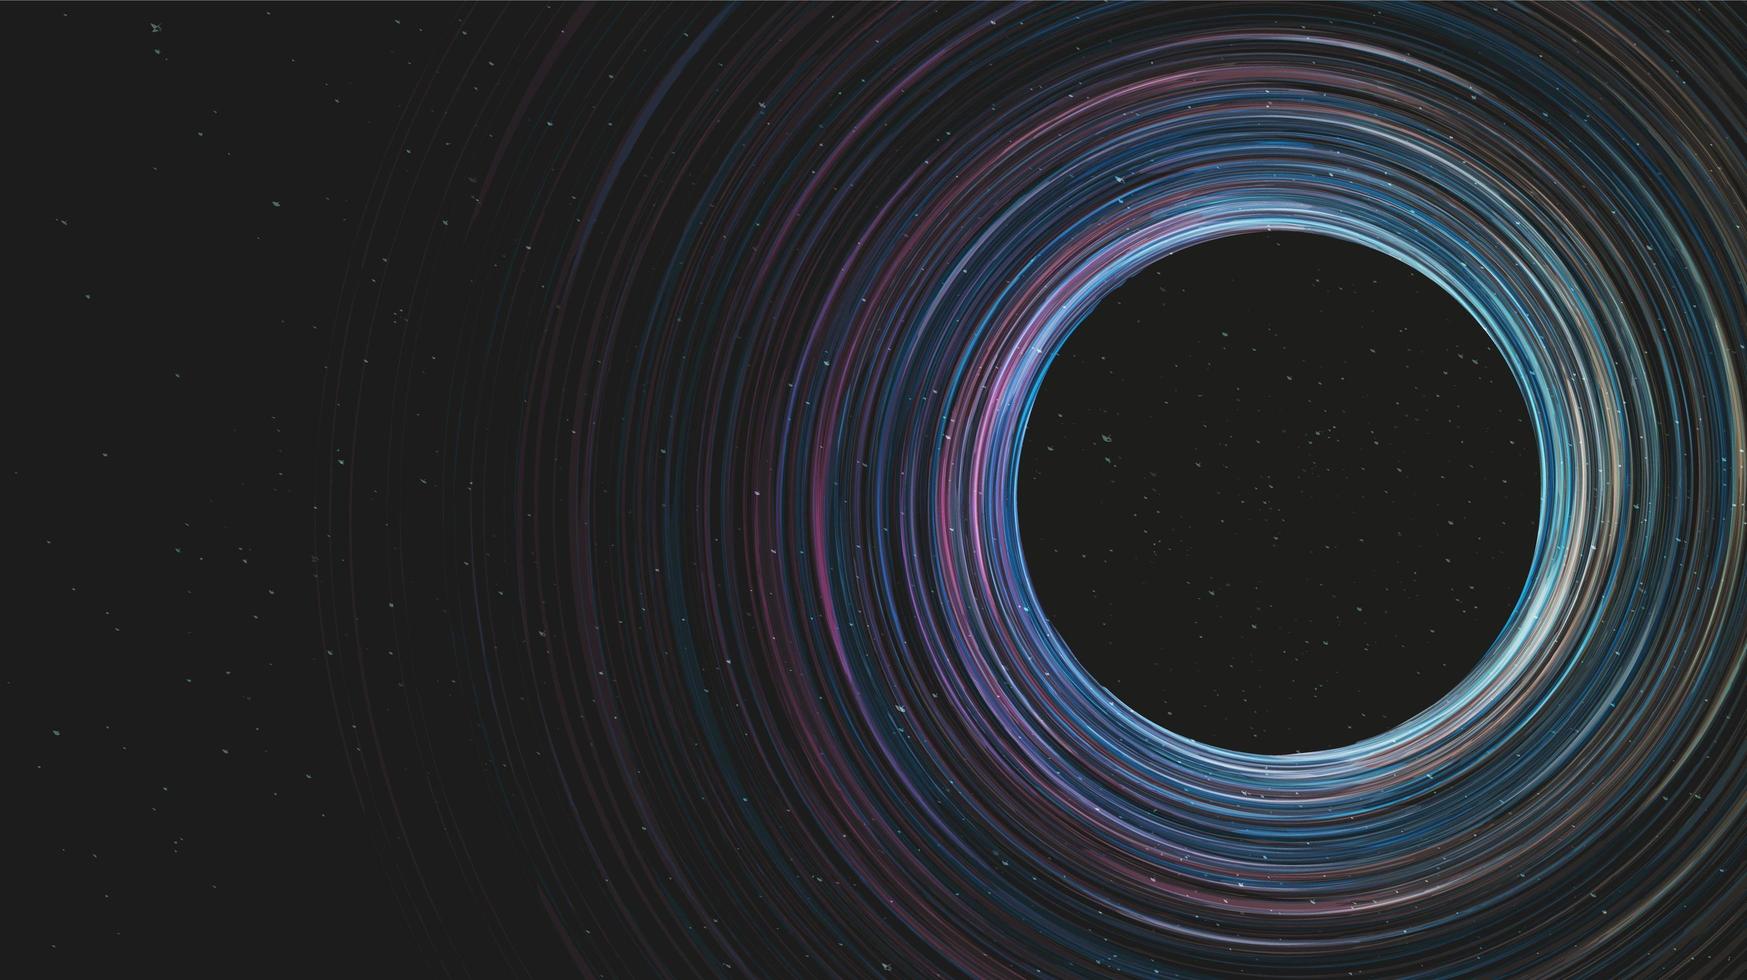 Dark Spiral Black Hole on Galaxy Background.planet and physics concept design,vector illustration. vector